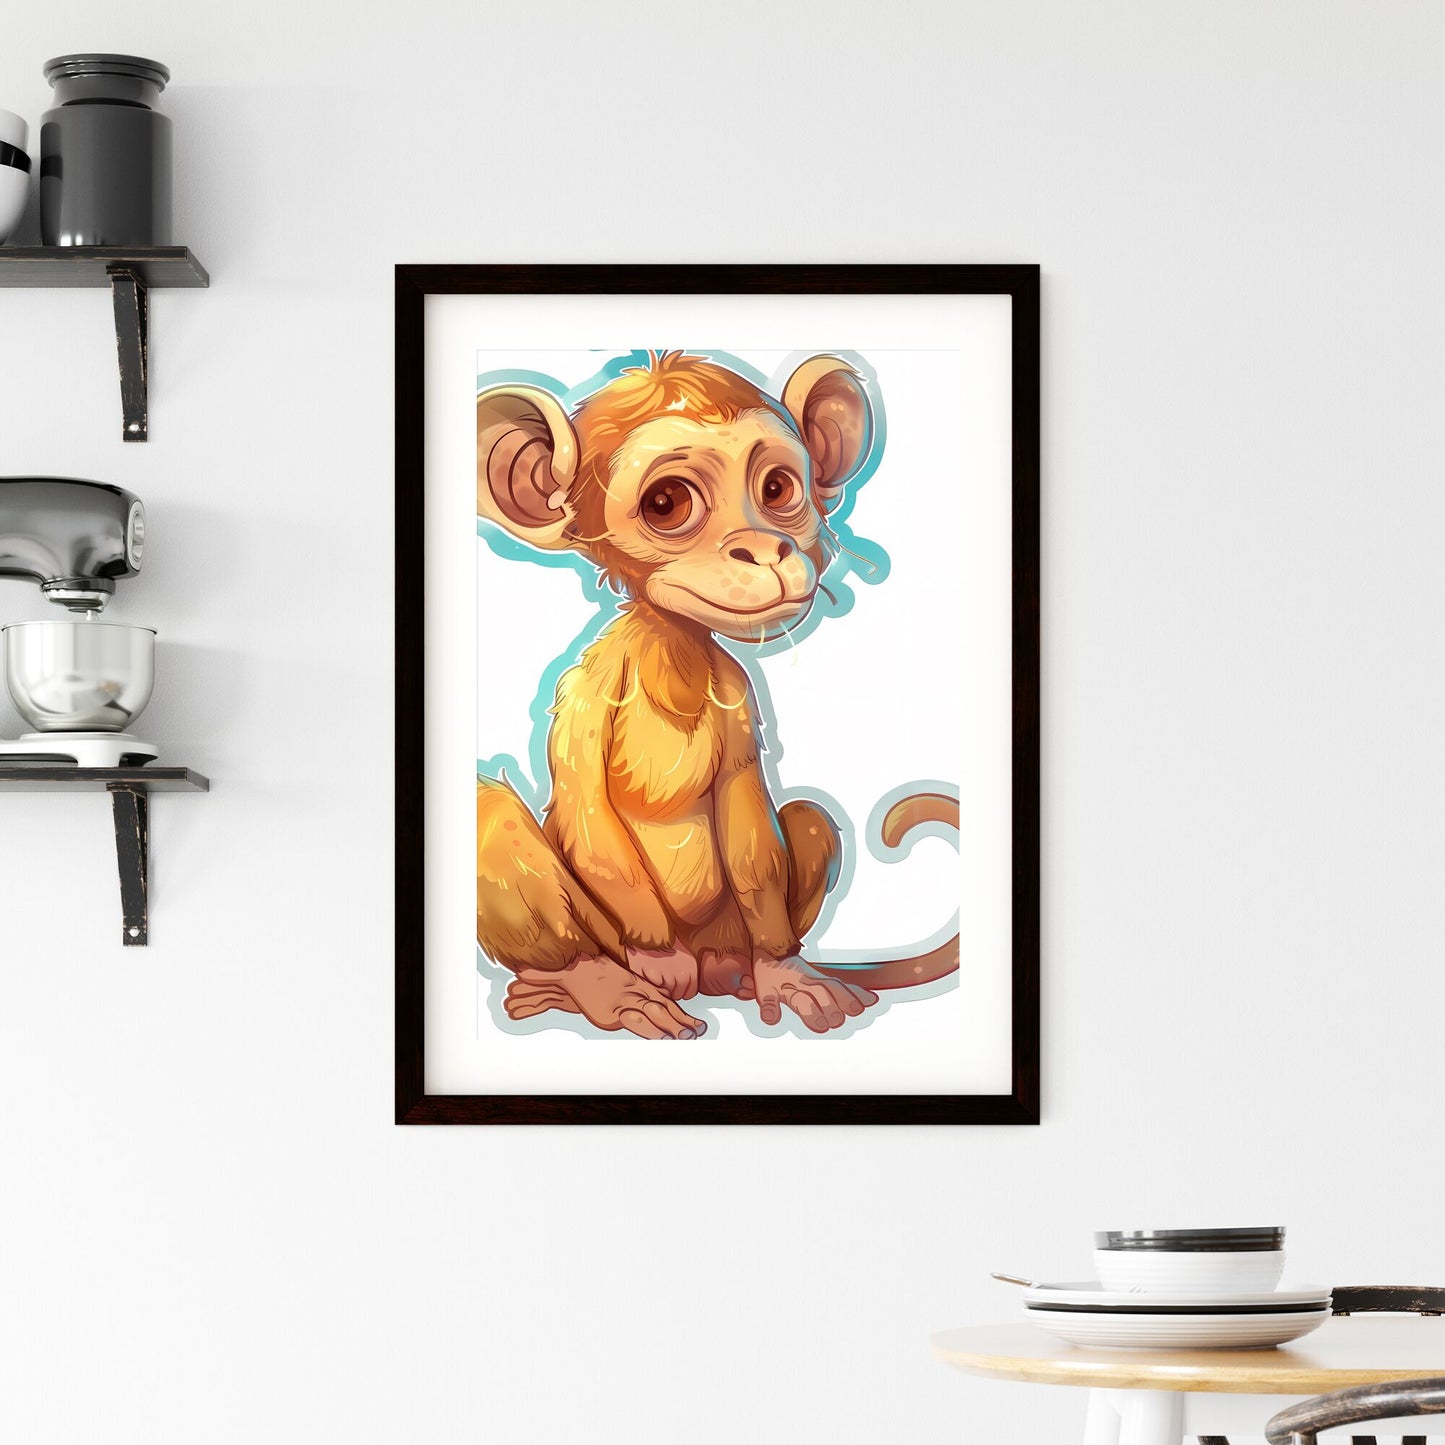 Mischievous Monkey in Vibrant Art: Humorous Animal Sticker with Simple Illustration Style, Emphasizing Expression and Pose Default Title